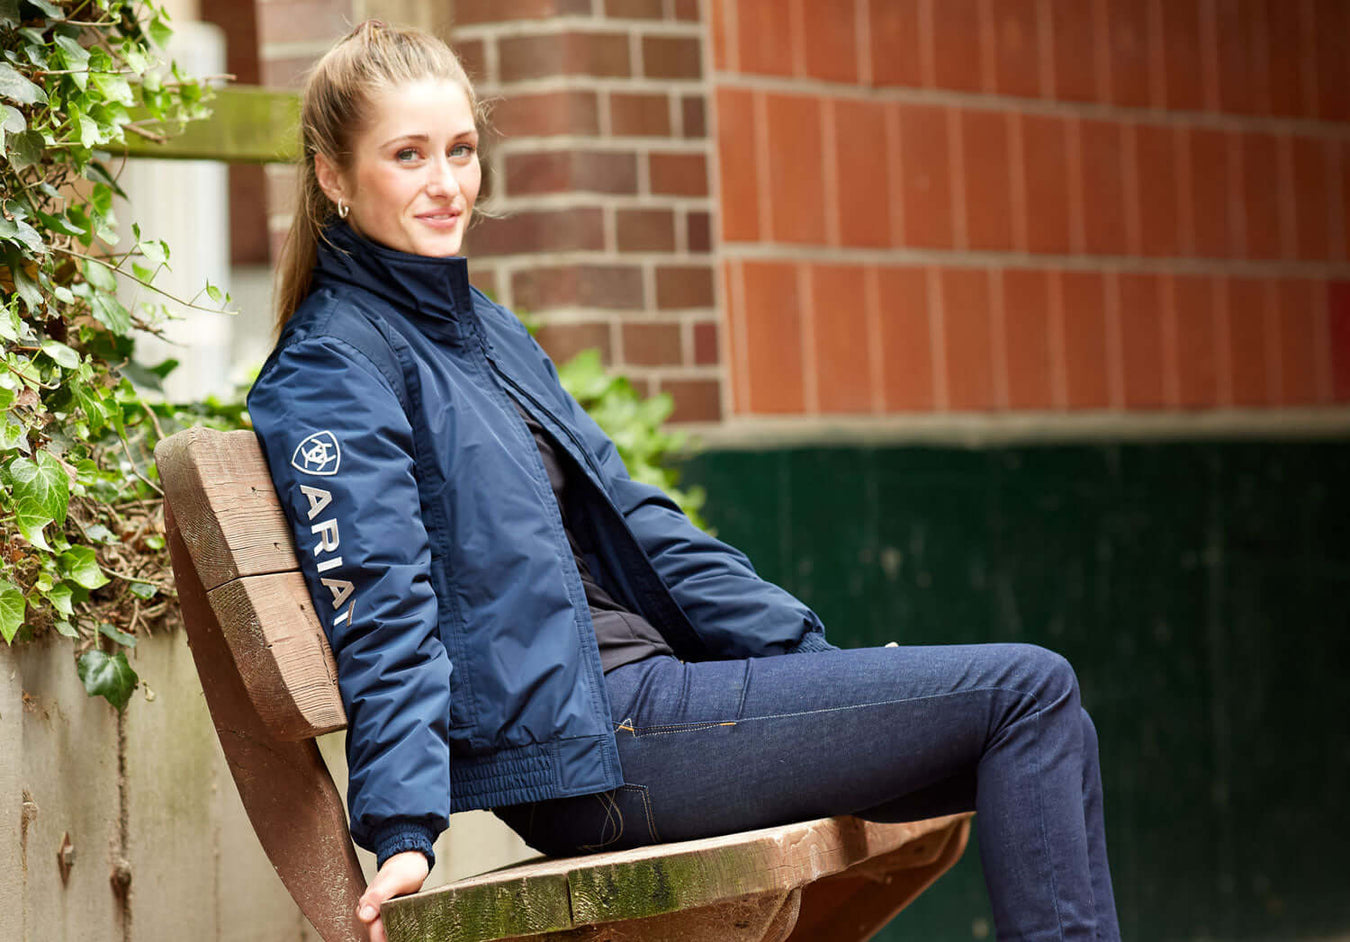 Ariat Stable Jackets and Competition Clothing and Ariat Footwear Riding Boots | North Devon Stockist Barnstaple Equestrian Supplies